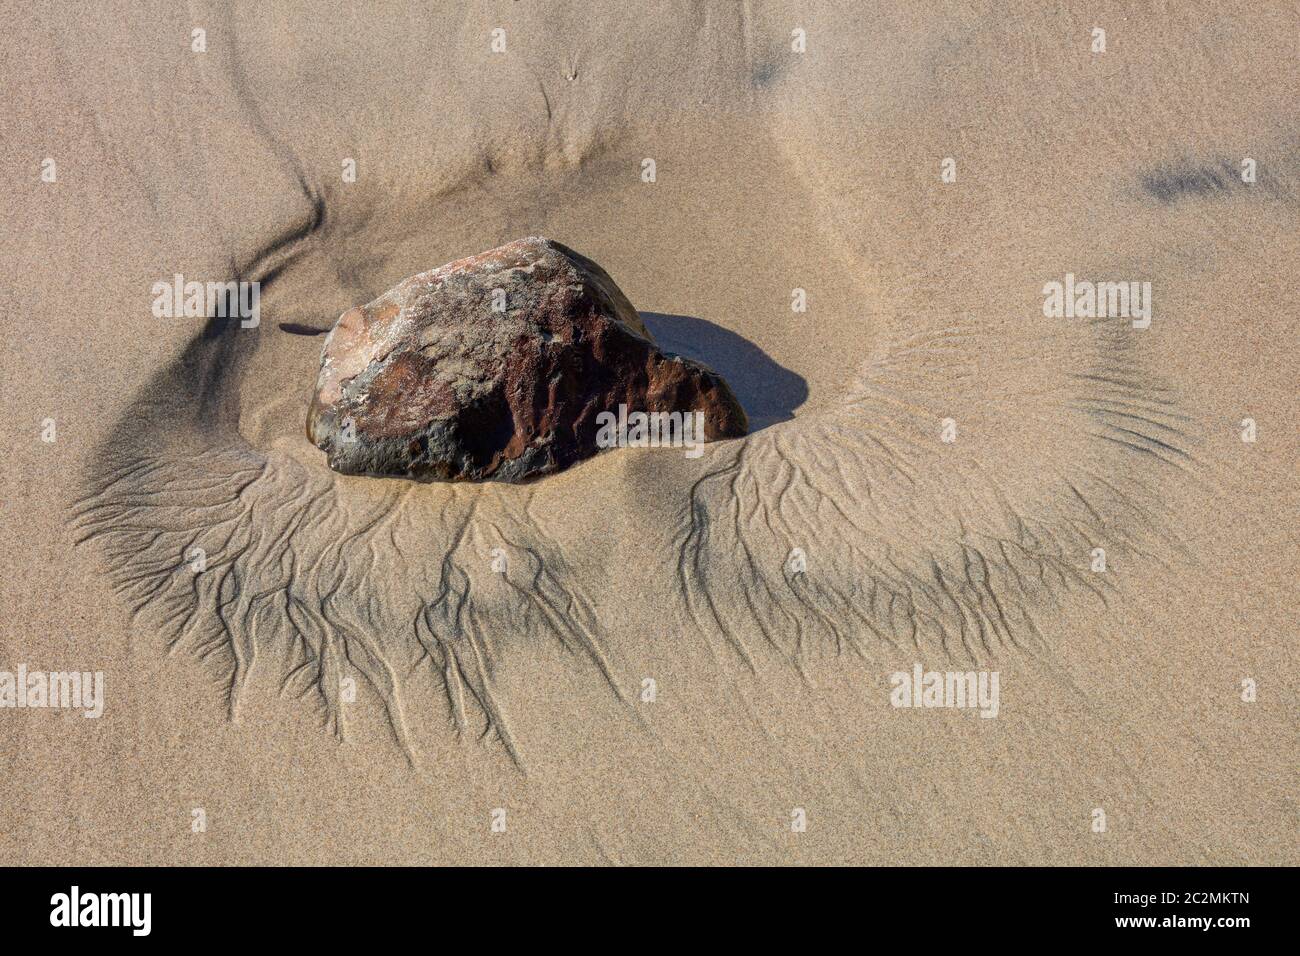 Sand pattern around a small rock from receding tide, Arcadia Beach State Wayside, Oregon Stock Photo